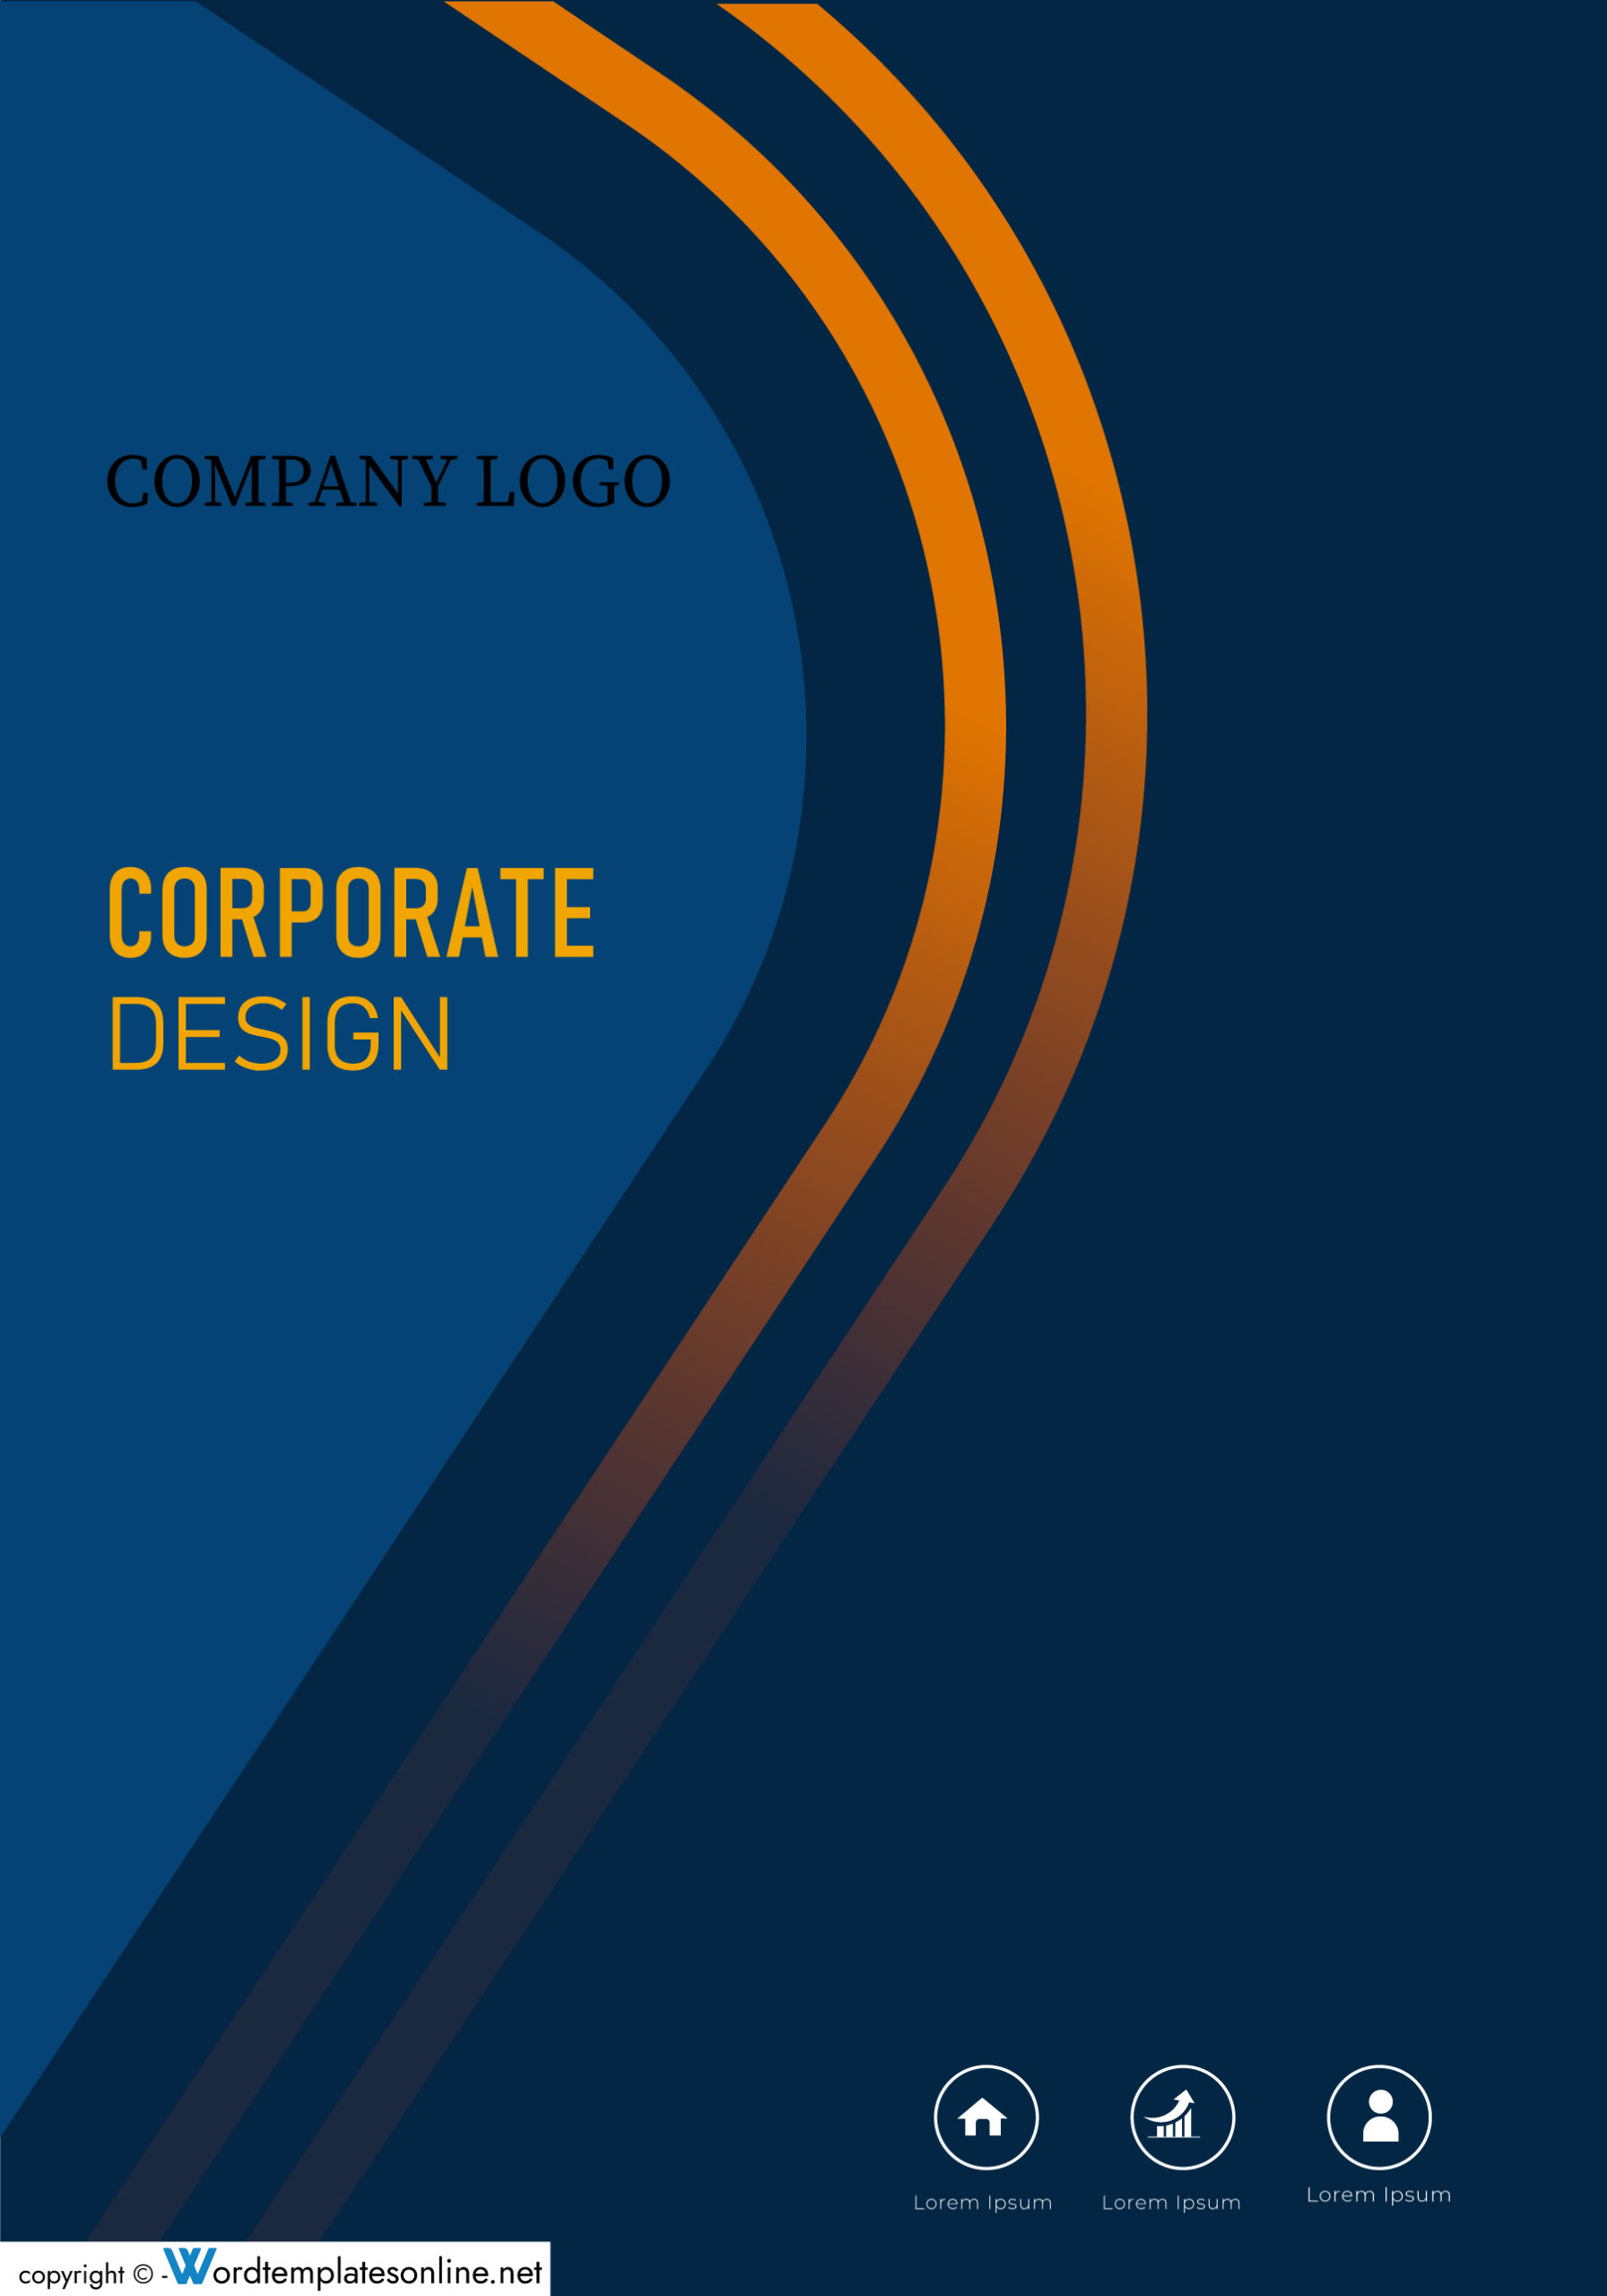 Professional Corporate Design Cover Page Template - Free Download